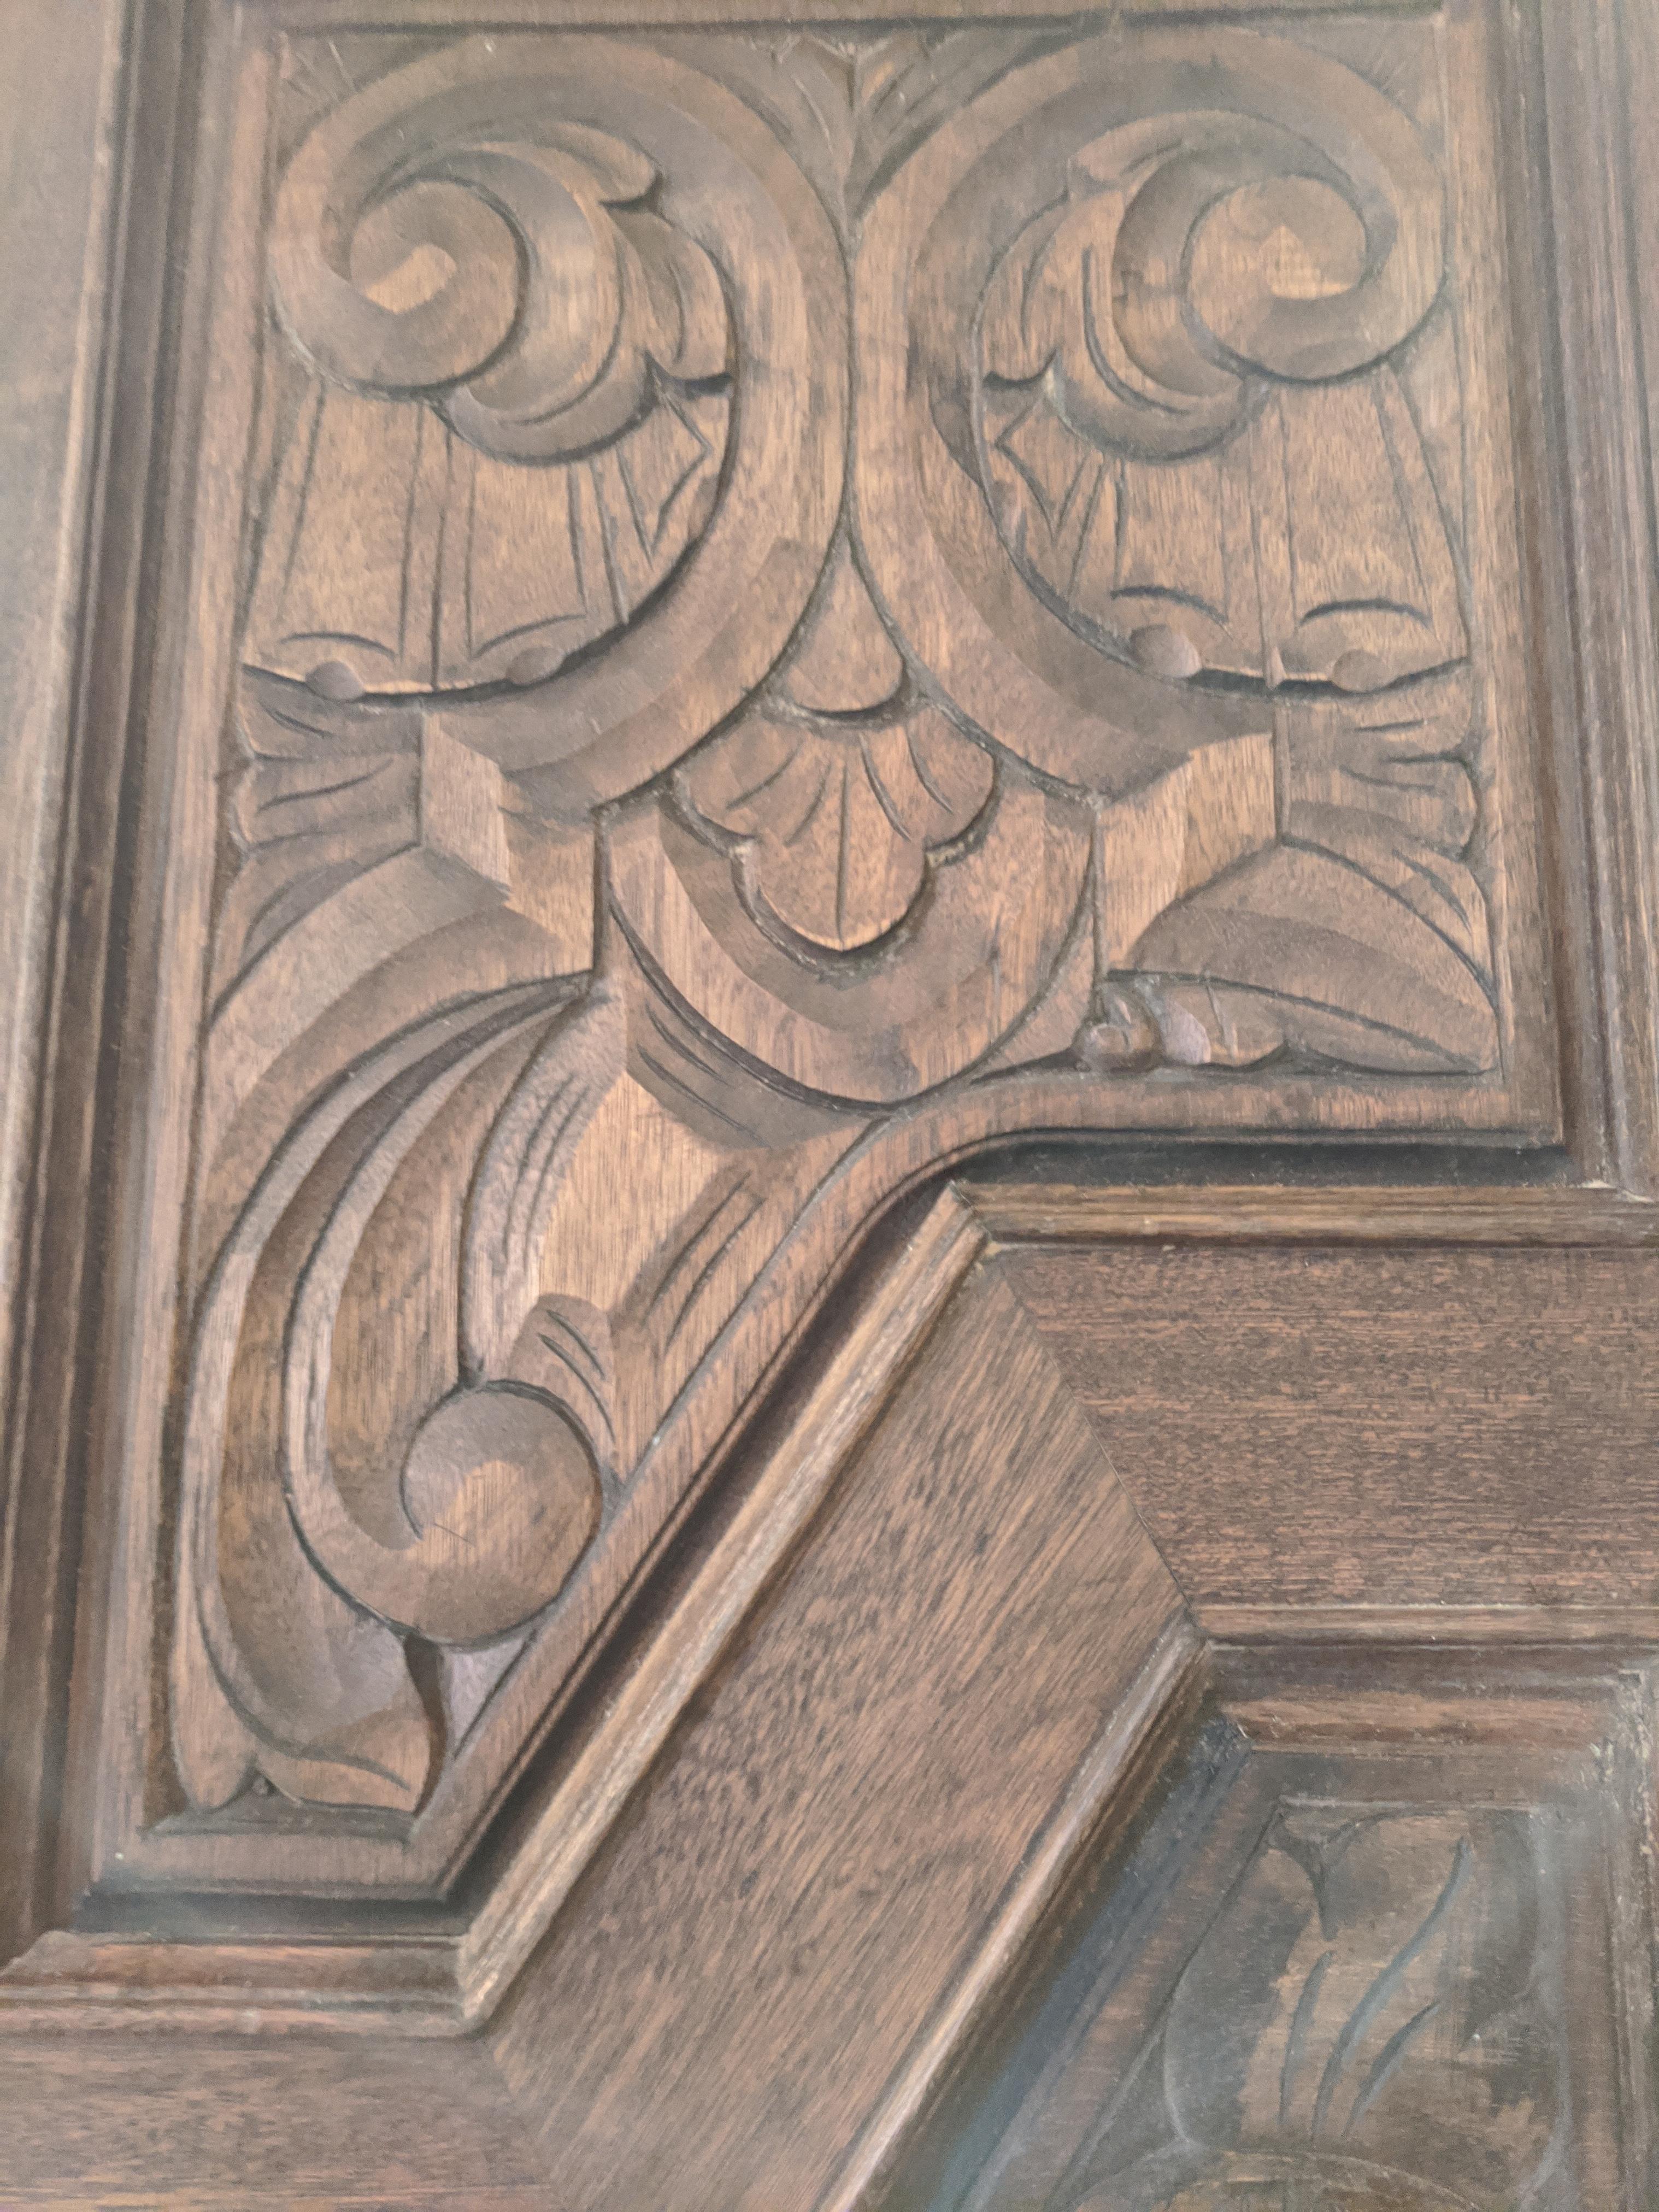 Hand Sculpted Wooden Doors - Art Deco Sculpture by Unknown